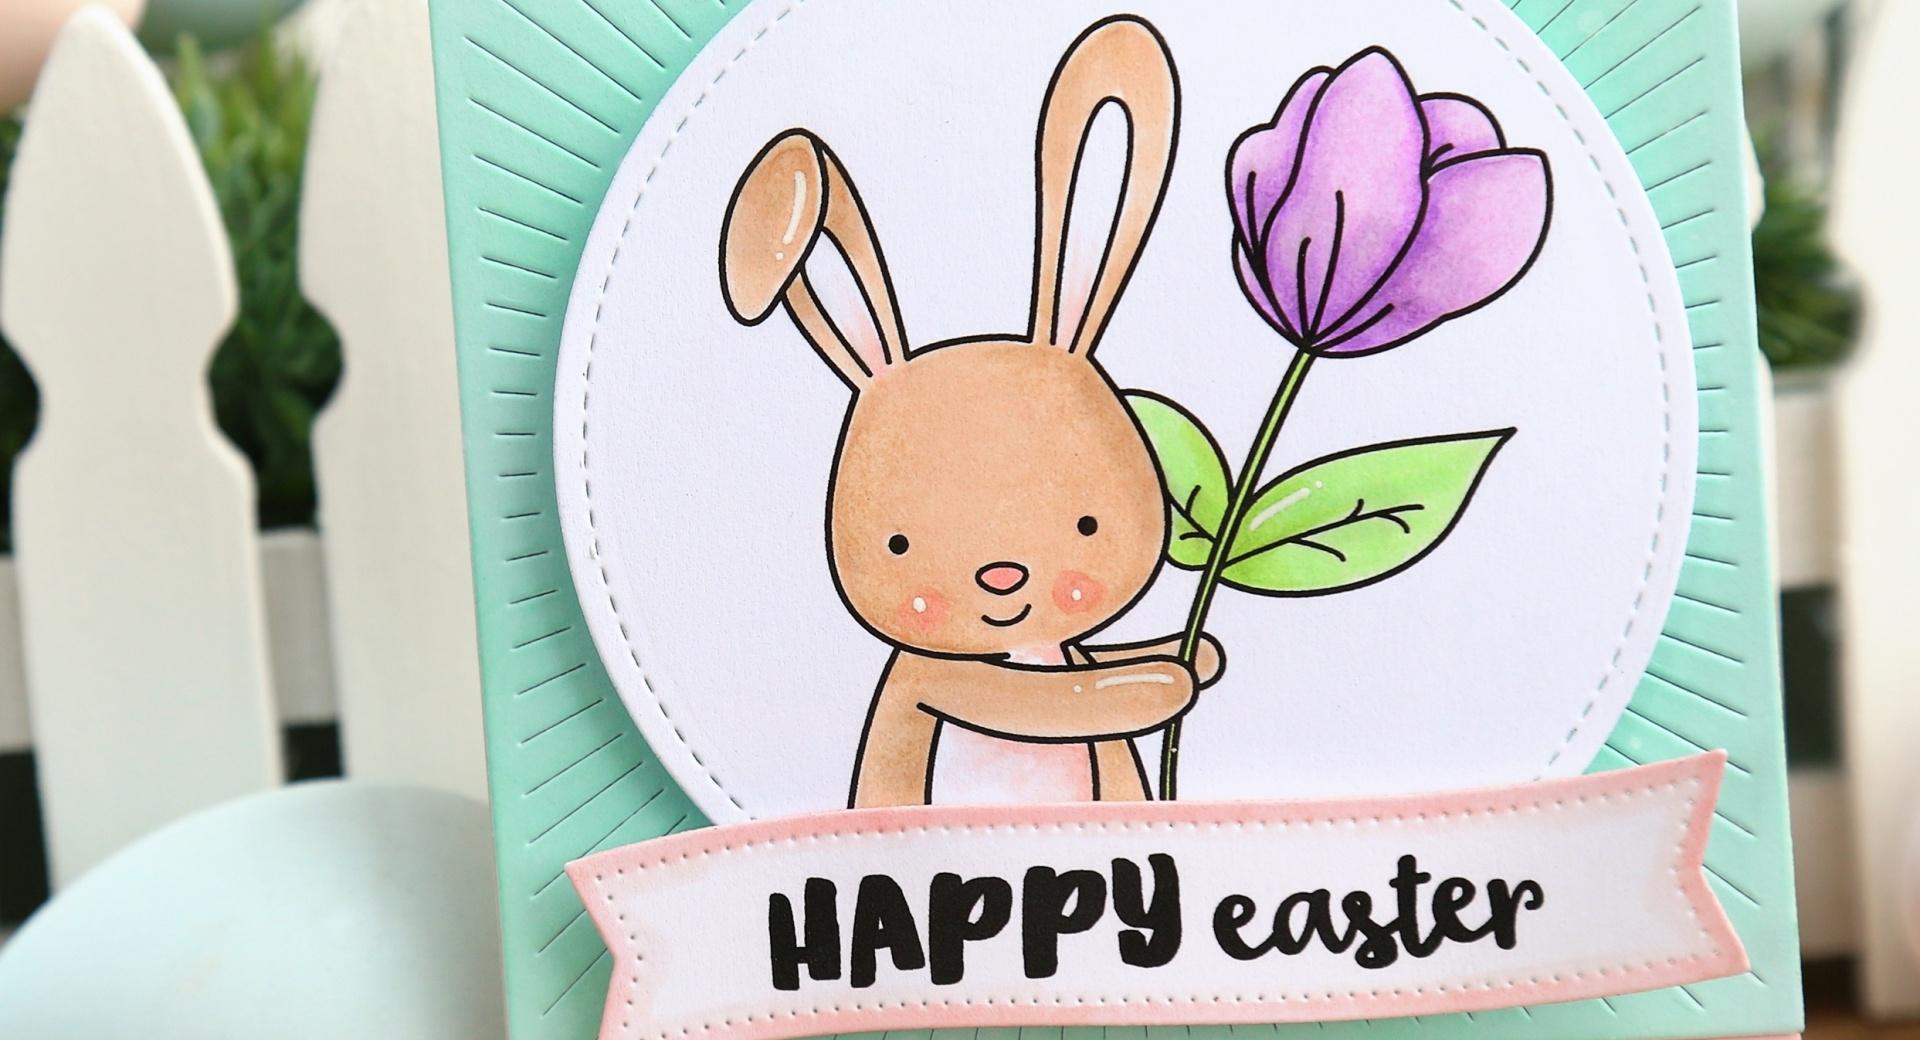 Cute Easter Bunny Card wallpapers HD quality